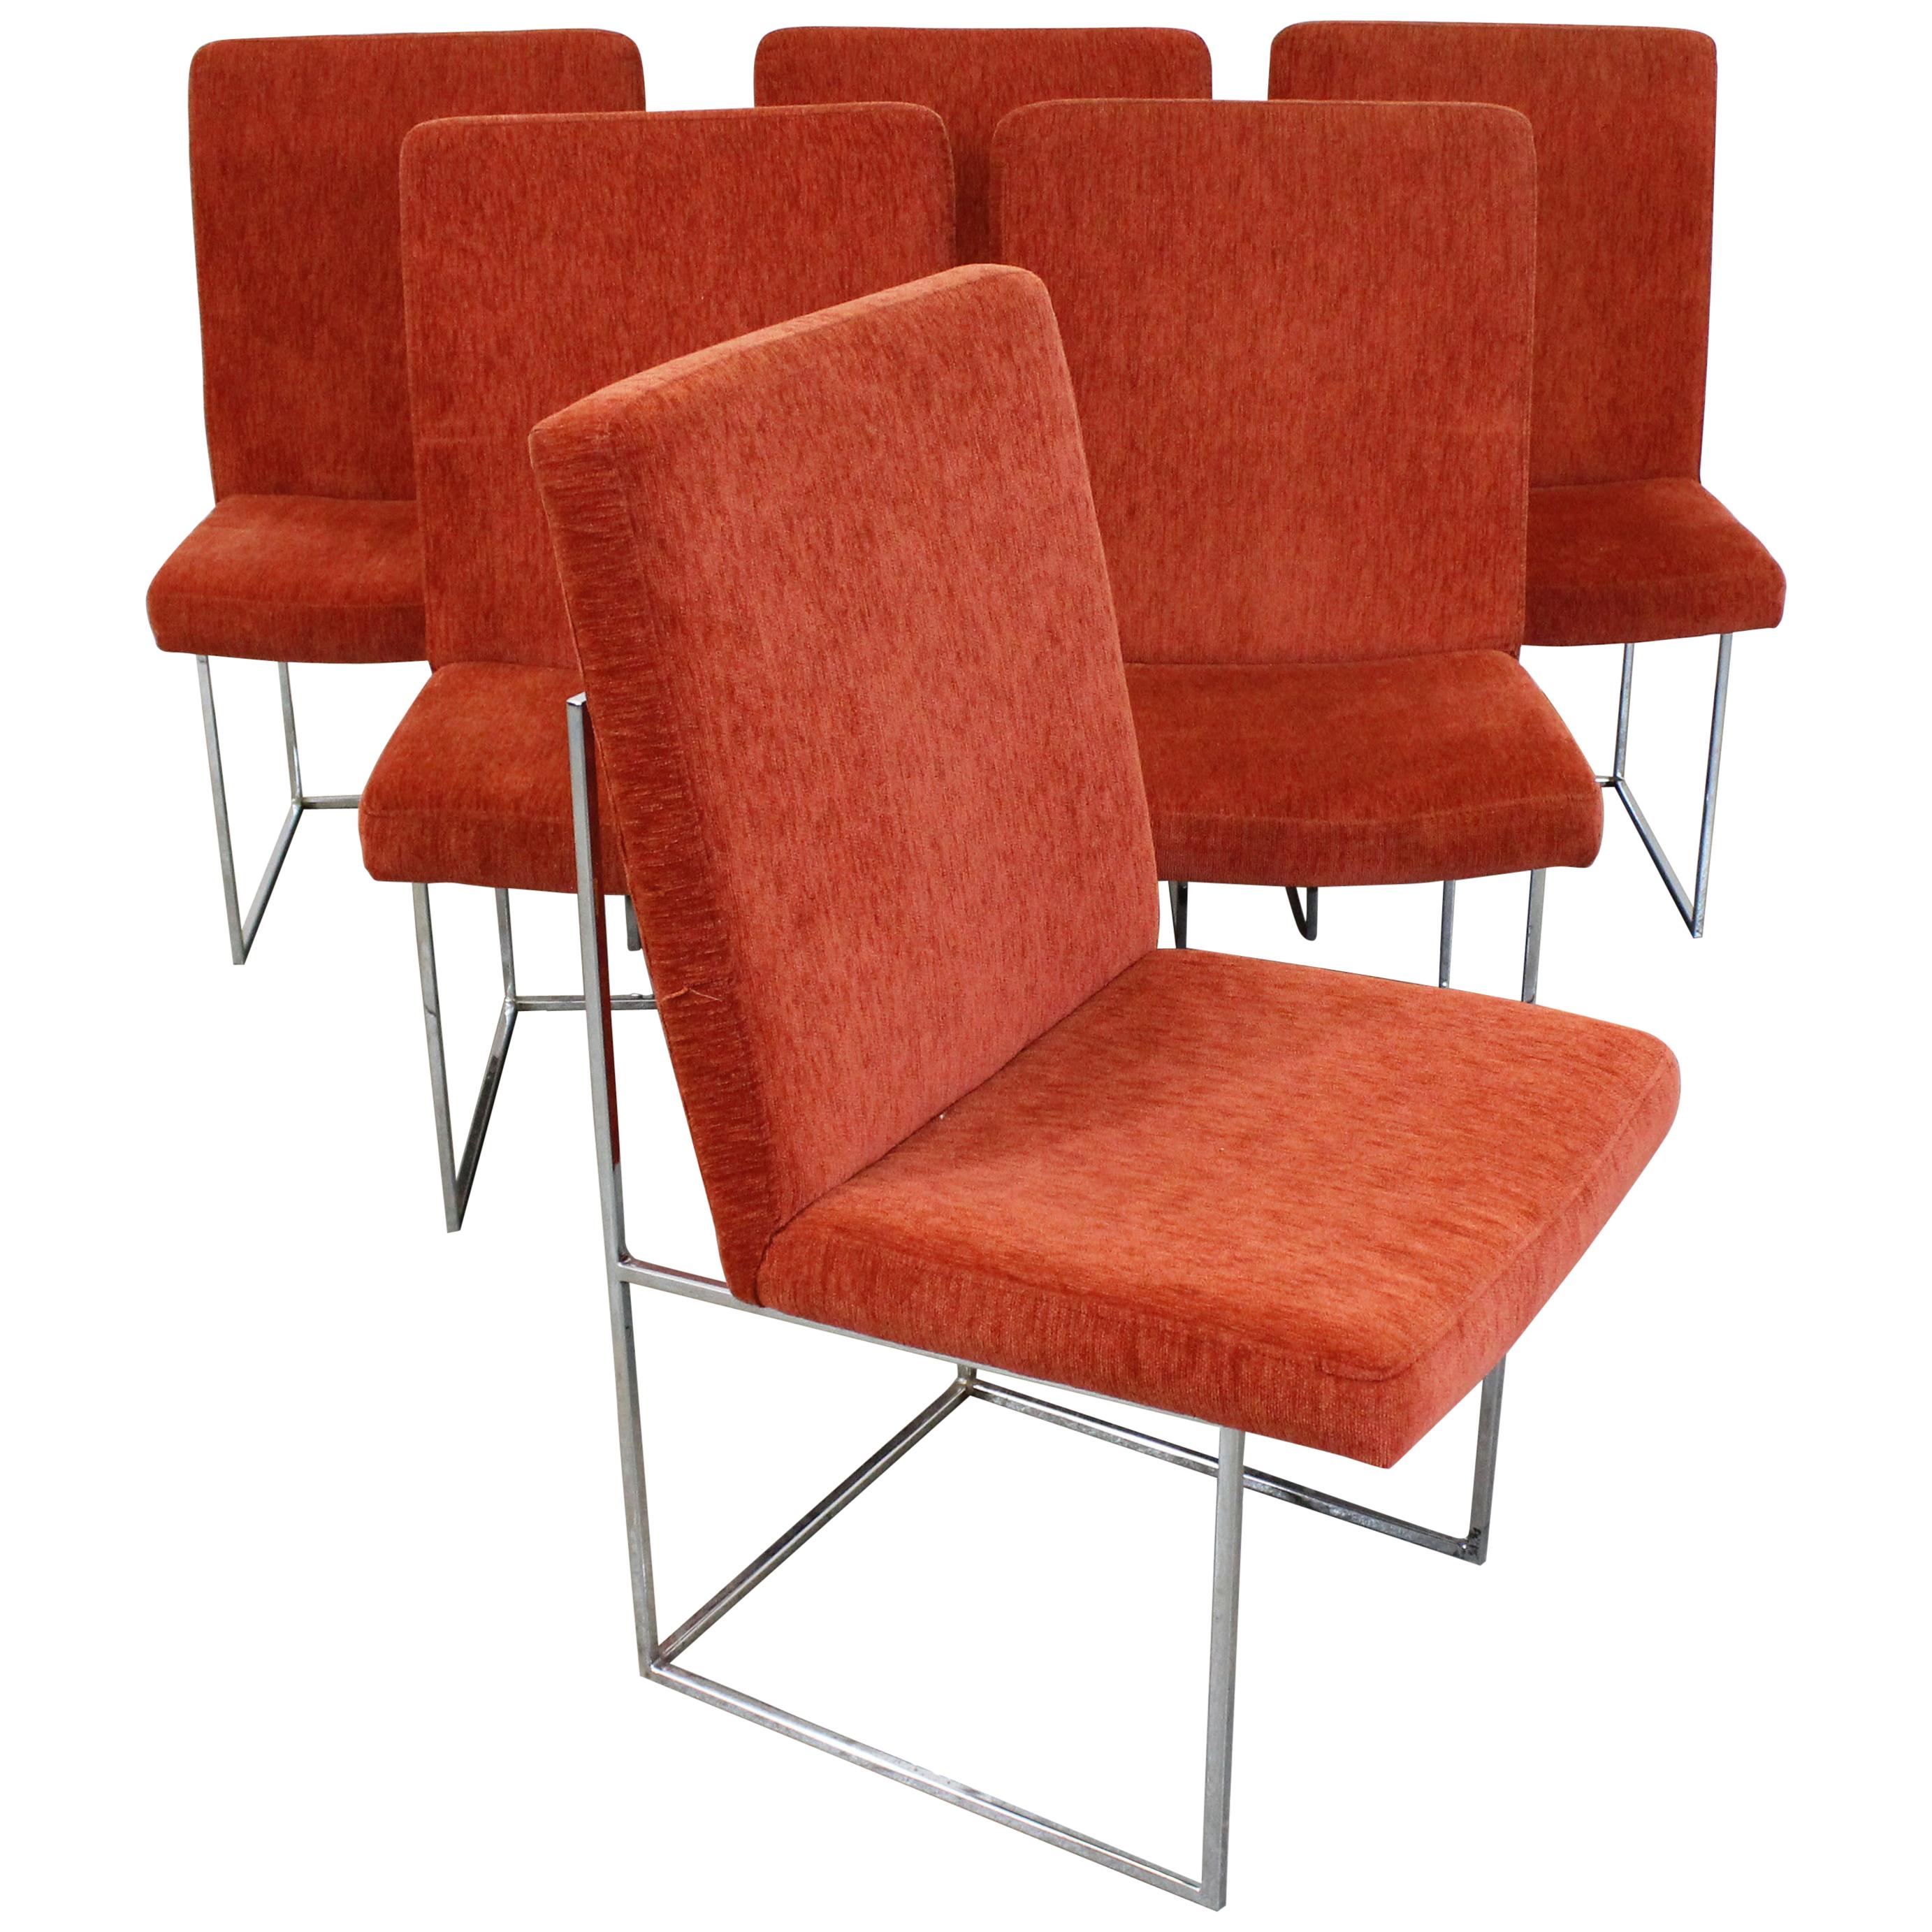 Set of 6 Mid-Century Modern Milo Baughman for Thayer Coggin Chrome Dining Chairs